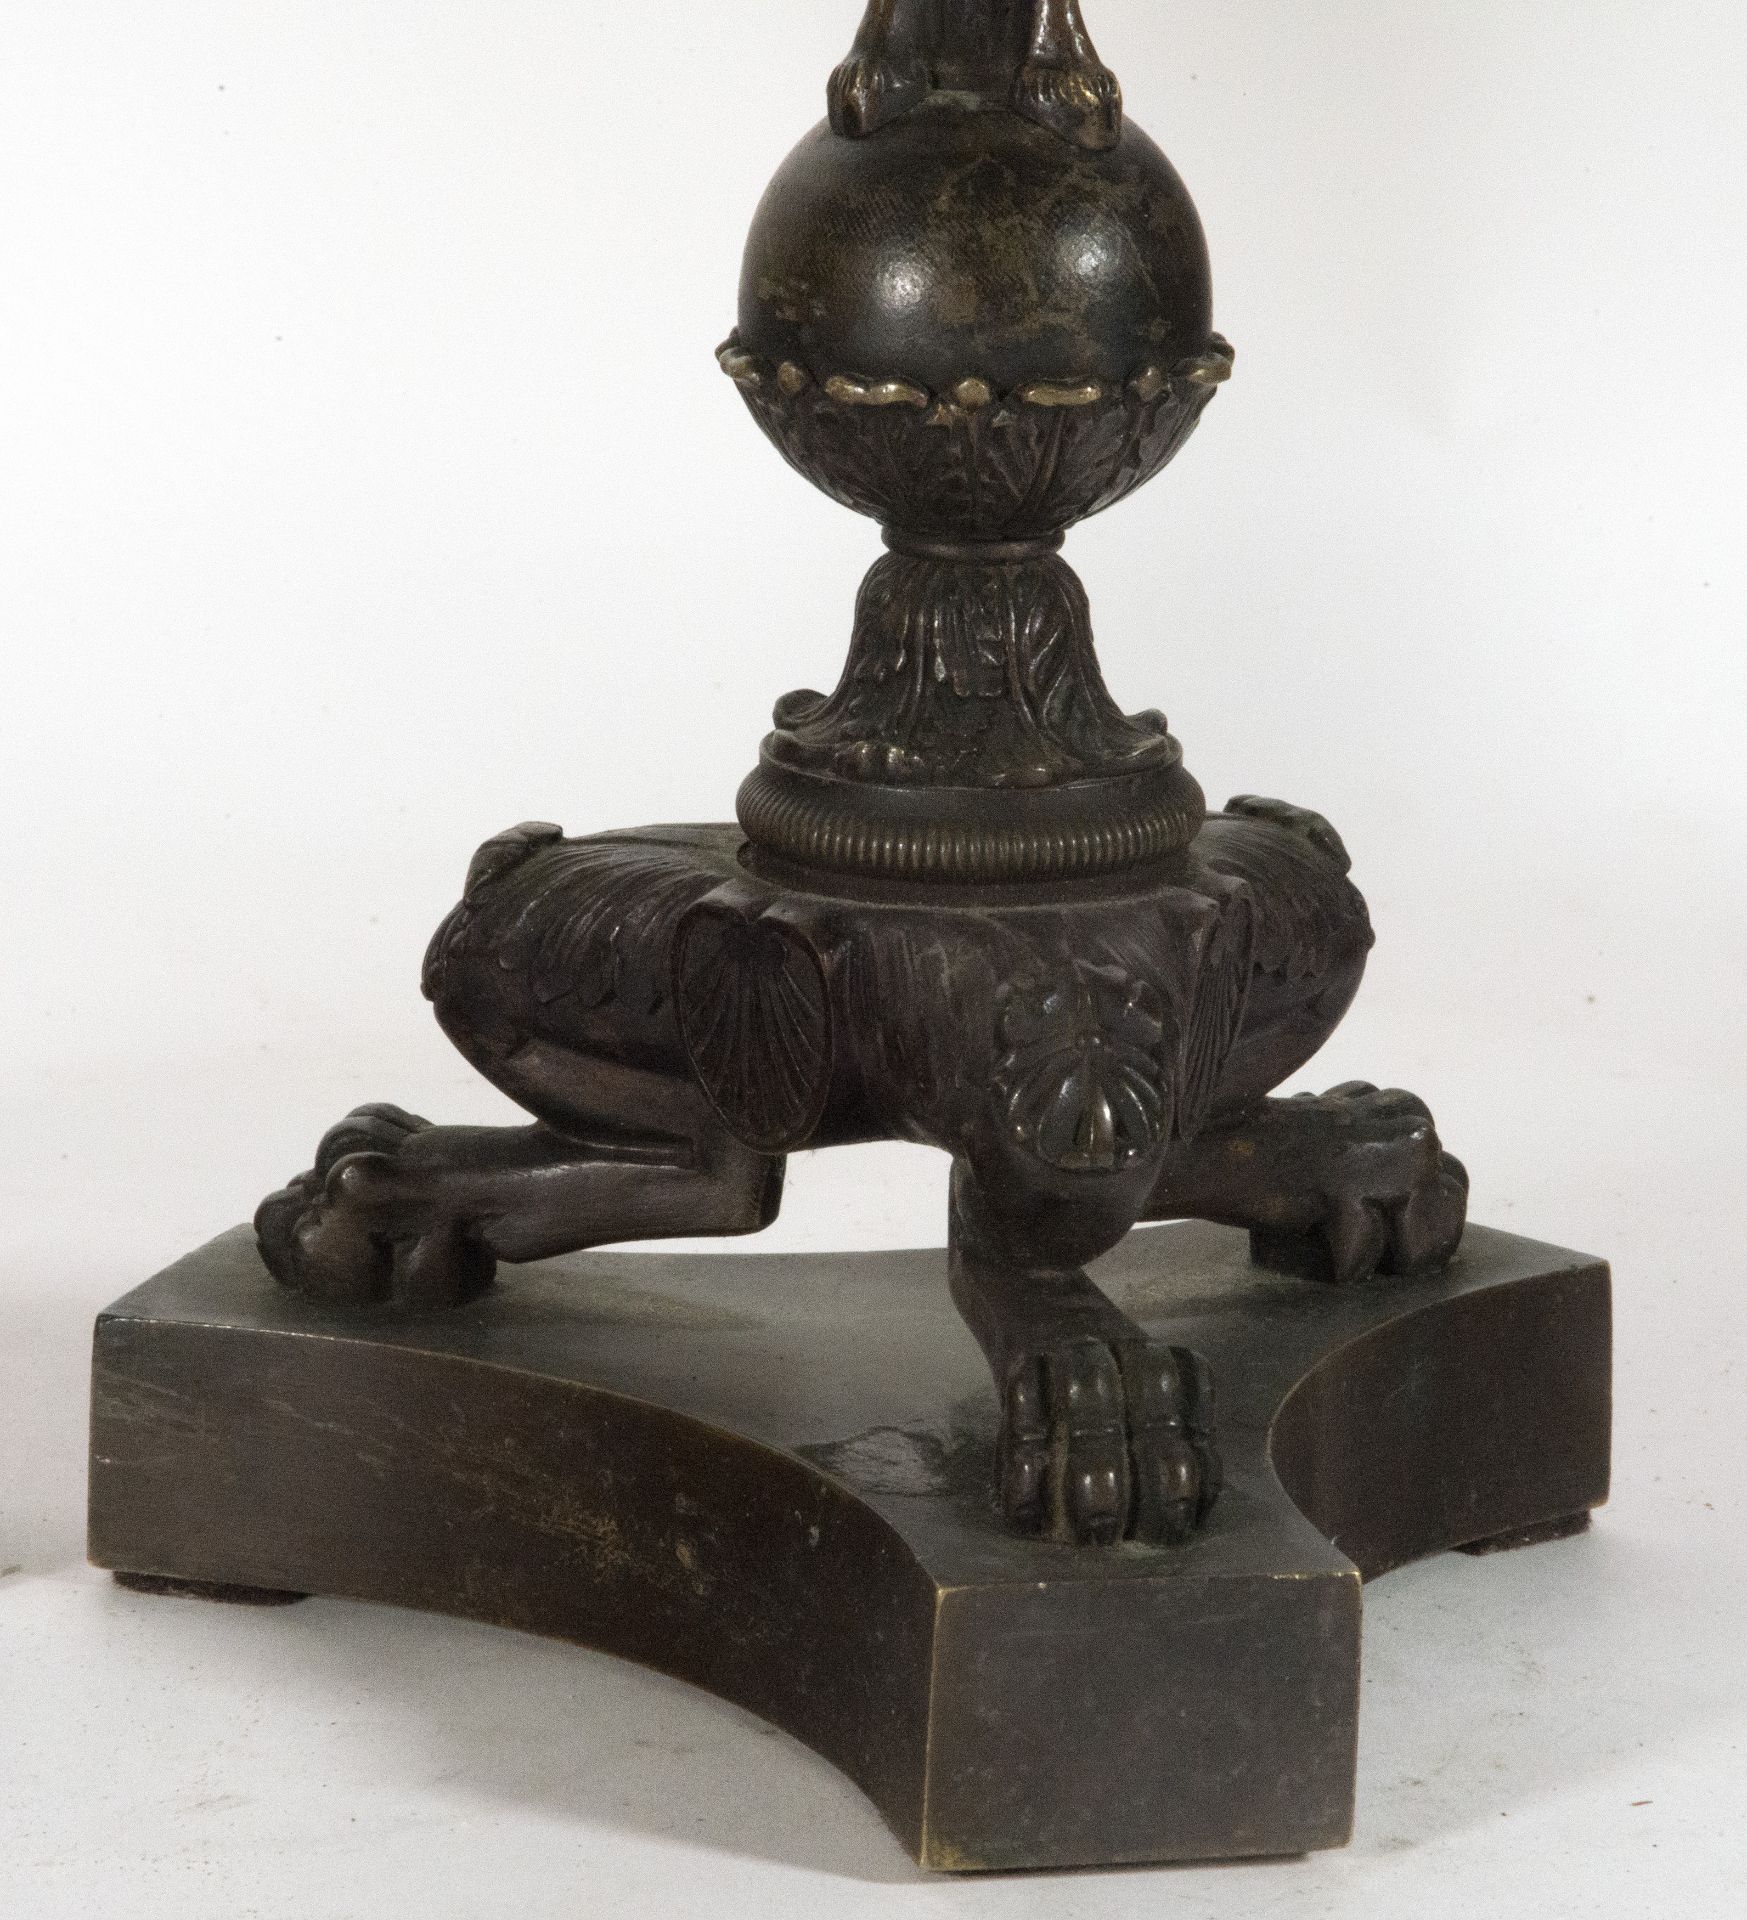 Pair of Renaissance Style Candelabras from Padua in patinated bronze, 19th century - Image 2 of 3